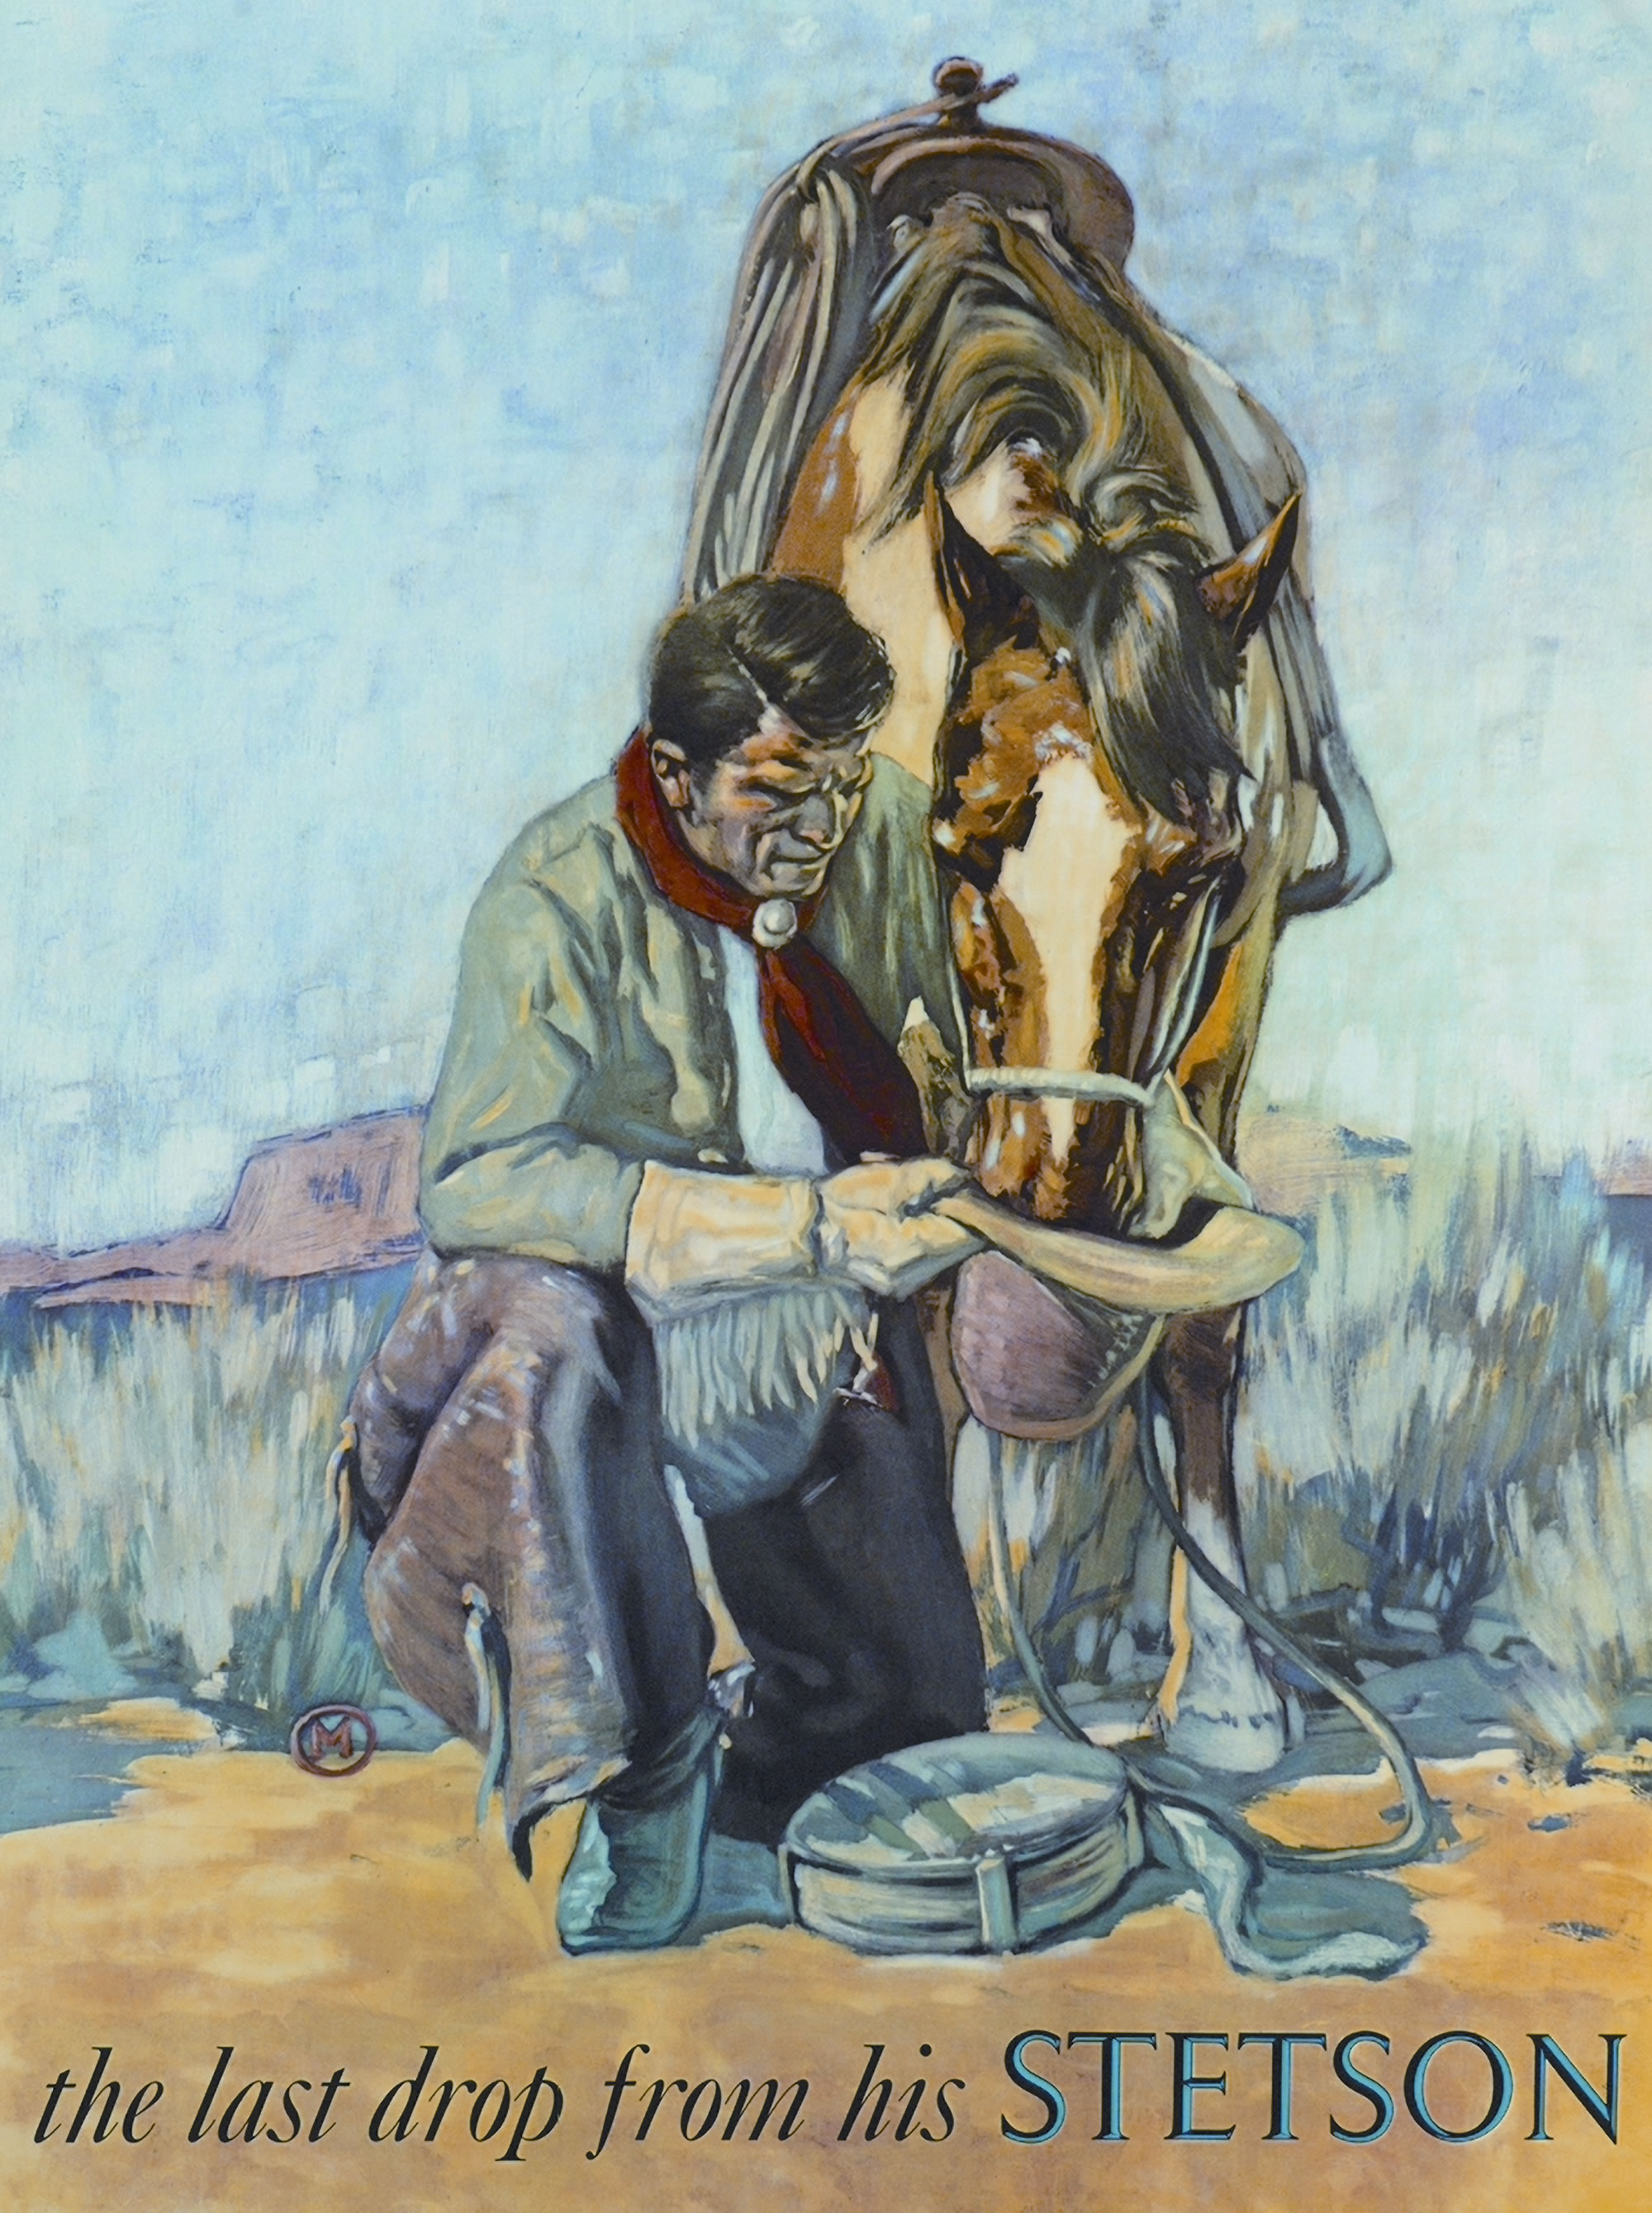 The Last Drop from his Stetson by Lon Megargee - ca. 1920 - 59.06 x 79.38 cm private collection